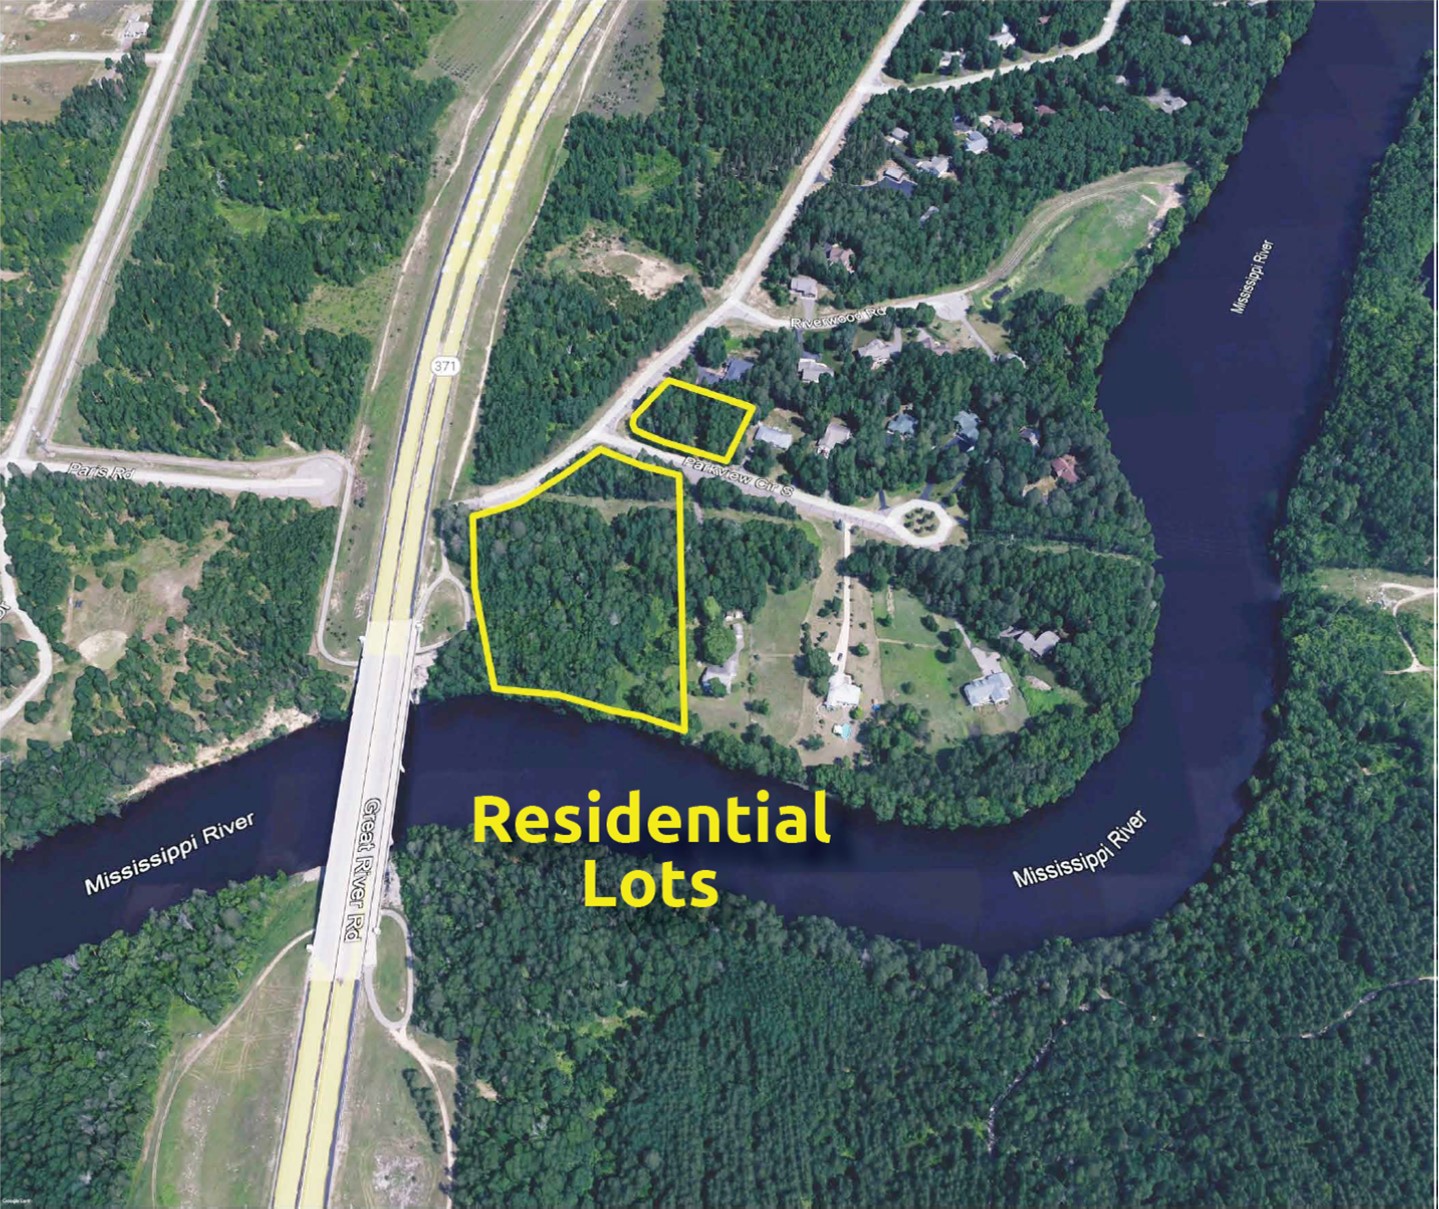 Residential Lots on the Mississippi River